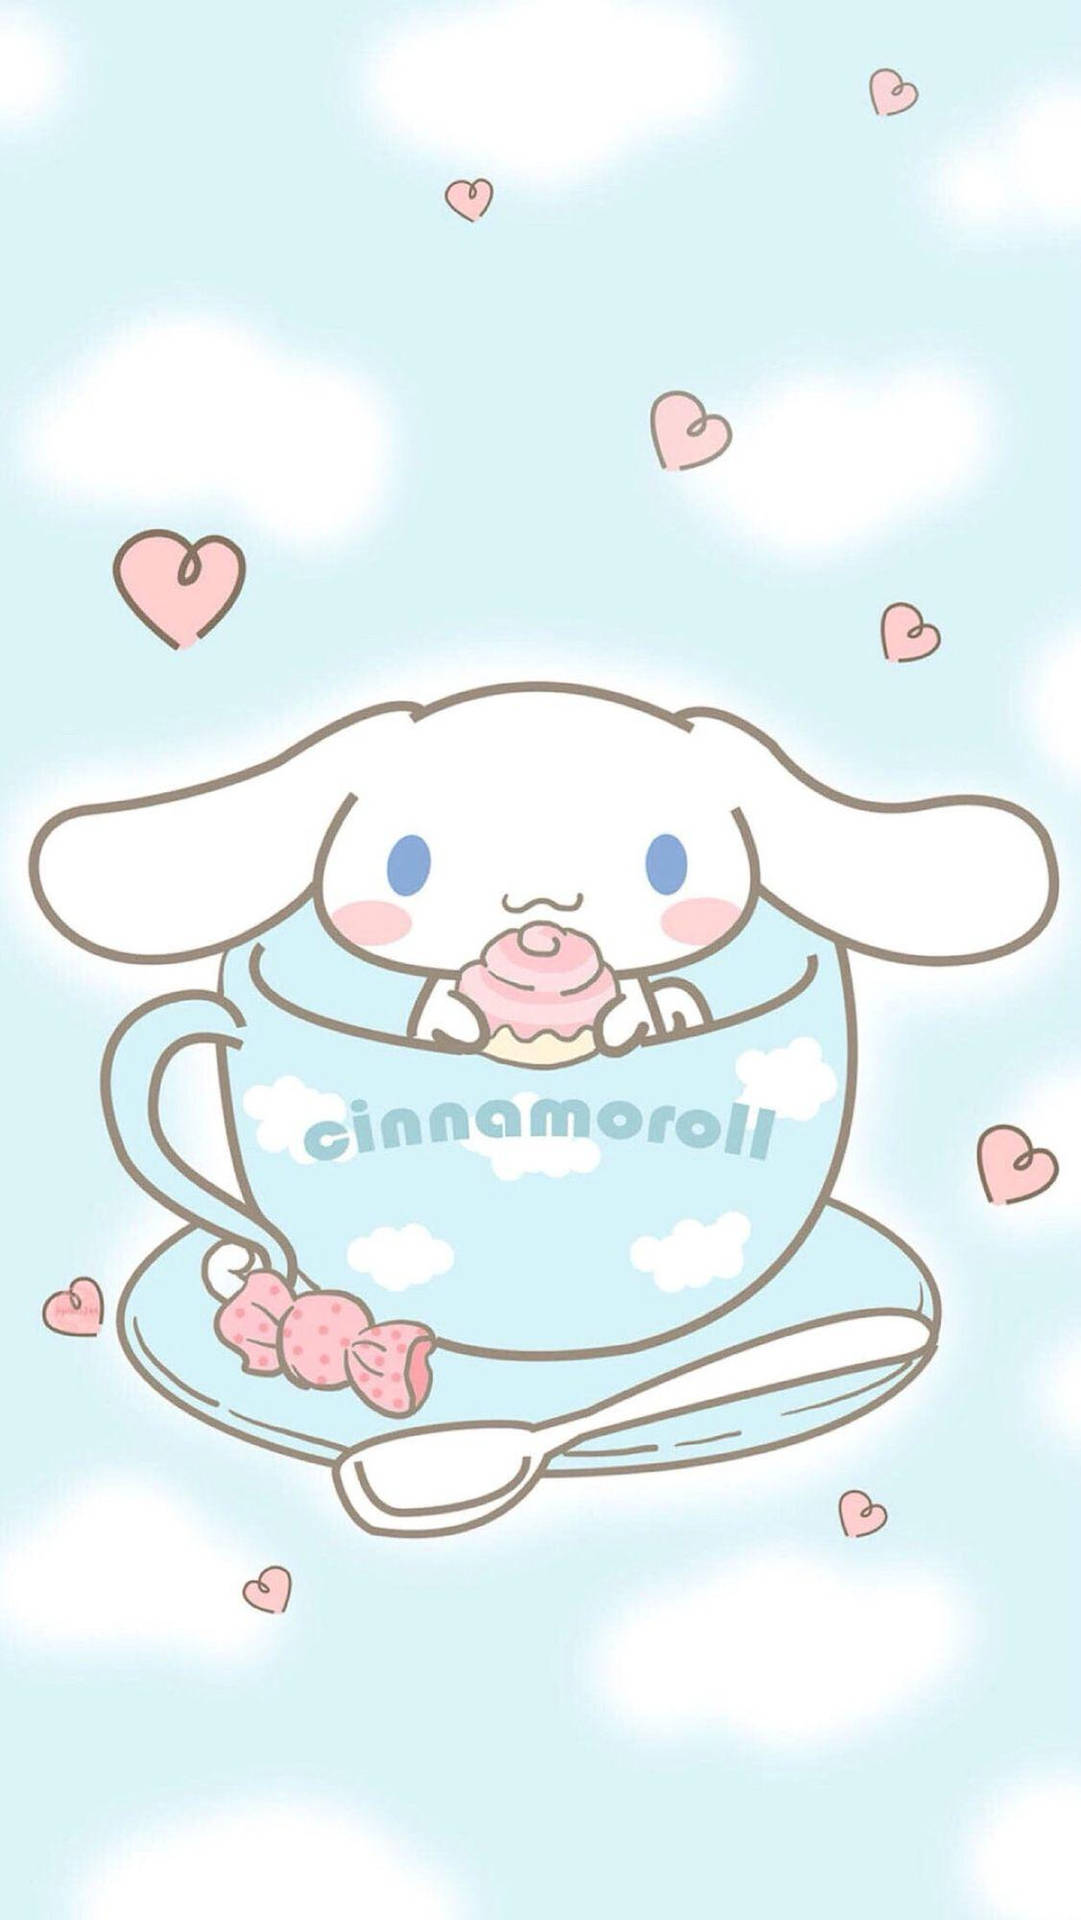 Adorable Cinnamoroll Lounging On Clouds In The Sky